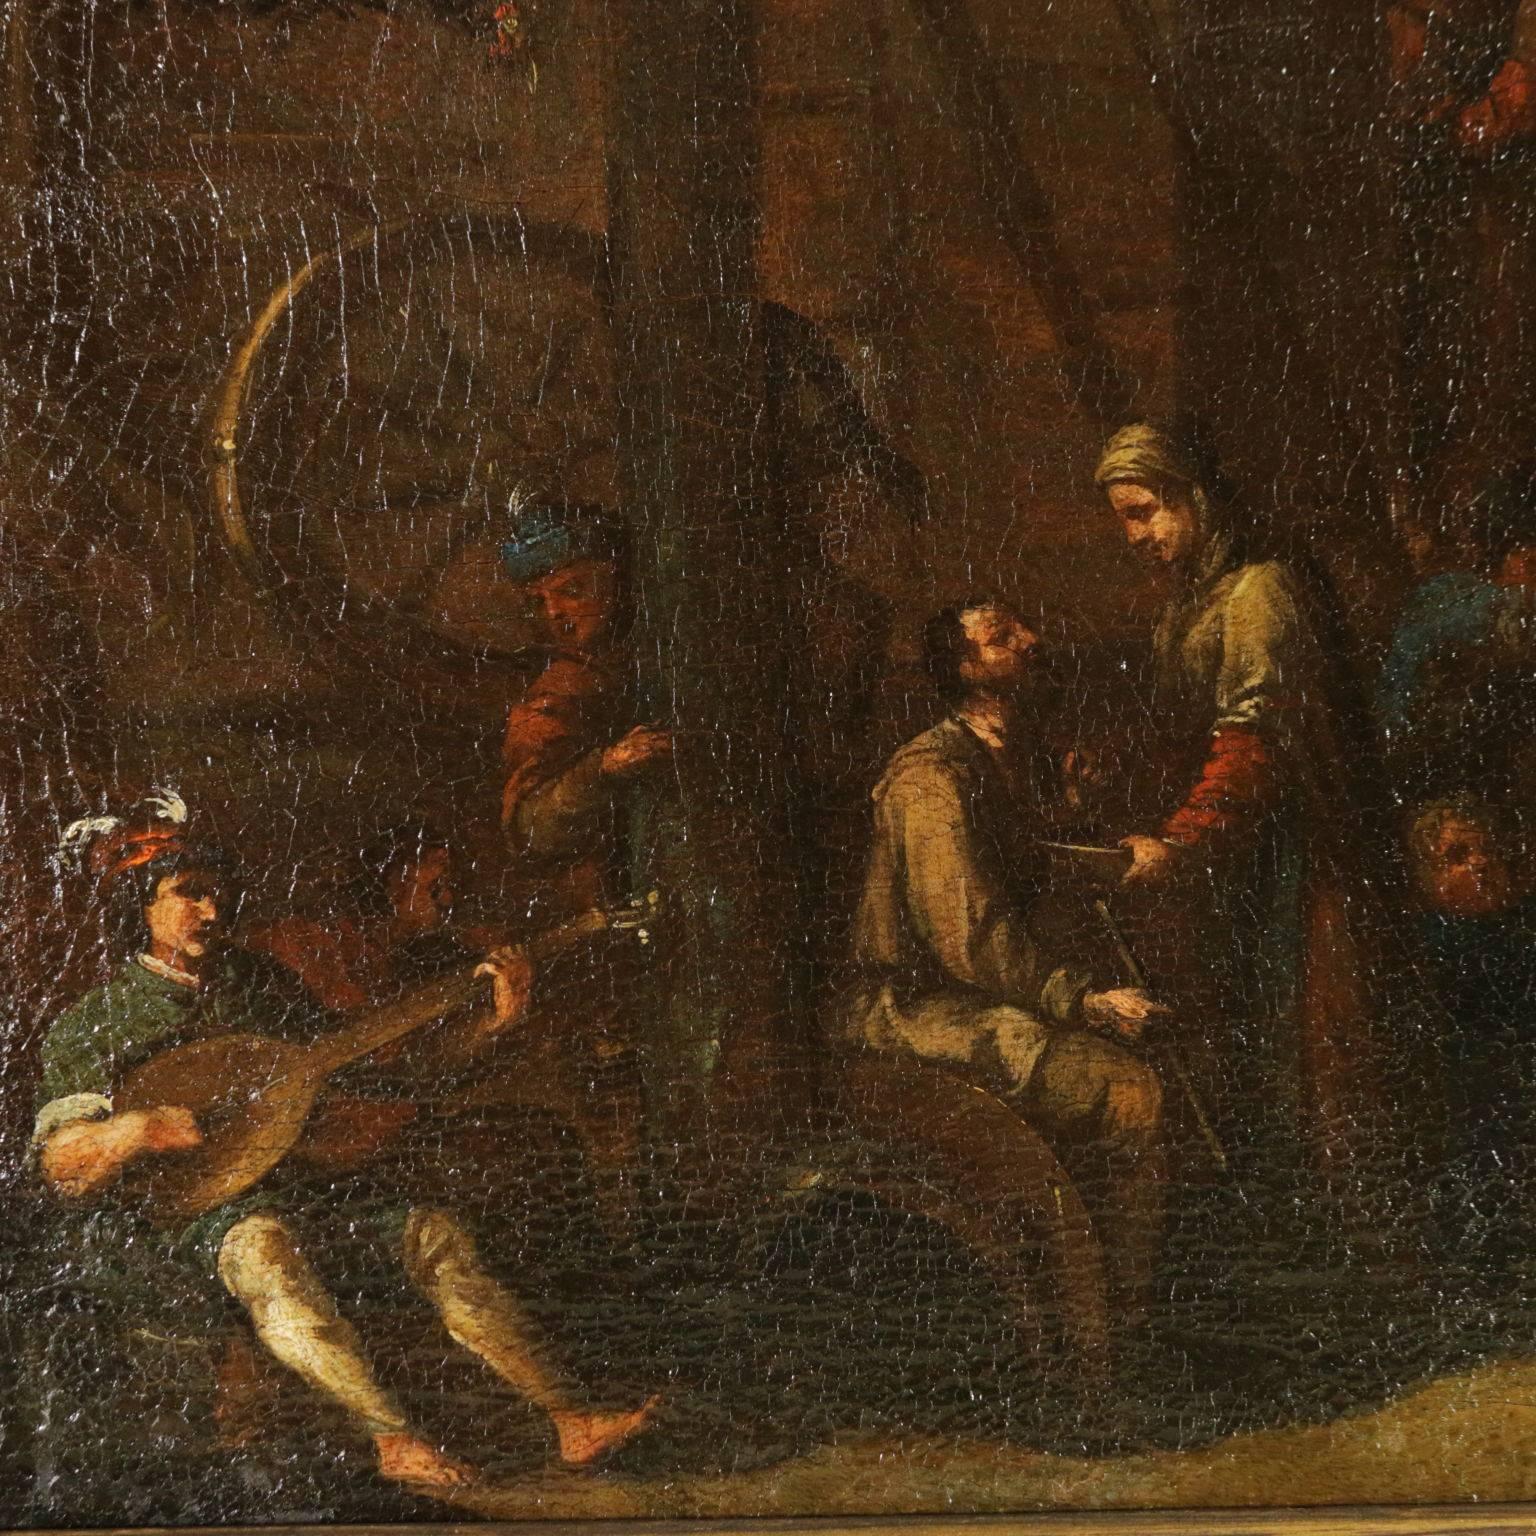 Scenes of Farmer Lives Oil on Canvas 17th-18th Century - Brown Landscape Painting by Unknown